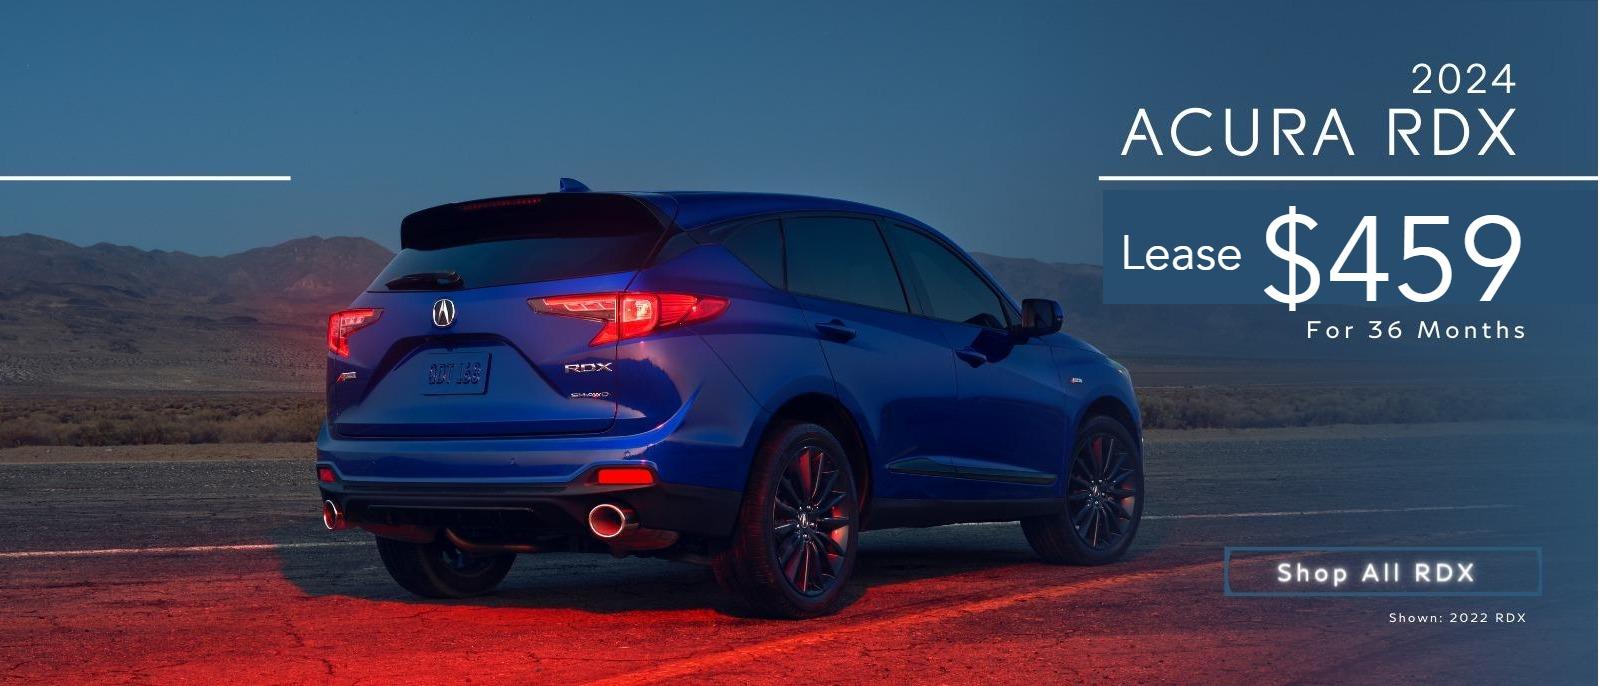 Acura RDX Parked outdoor 2024 RDX SH-AWD 10 Speed Automatic

Lease $459& Per month for 36 months. $5,799 Total due at signing.

*Closed-end lease for 2024 RDX SH-AWD 10 Speed Automatic vehicles (TC2H3RJNW) available from May 1, 2024 through July 1, 2024, available to well-qualified lessees approved by Acura Financial Services. Not all lessees will qualify. Higher lease rates apply for lessees with lower credit ratings. Lease offers vary based on MSRP. MSRP $45,545.00 (includes destination; excludes taxes, titles, license and documentary service fees). Actual net capitalized cost $39,966.93. Net capitalized cost includes $595 acquisition fee. Dealer contribution may vary and could affect actual lease payment. Total monthly payments $16,524.00. Option to purchase at lease end $26,506.00.
Must take new retail delivery of vehicle from dealer stock by July 1, 2024. Lessee responsible for maintenance, excessive wear/tear and 15¢/mile over 10,000 miles/year for vehicles with MSRP less than $30,000, and 20¢/mile over 10,000 miles/year for vehicles with MSRP of $30,000 or more